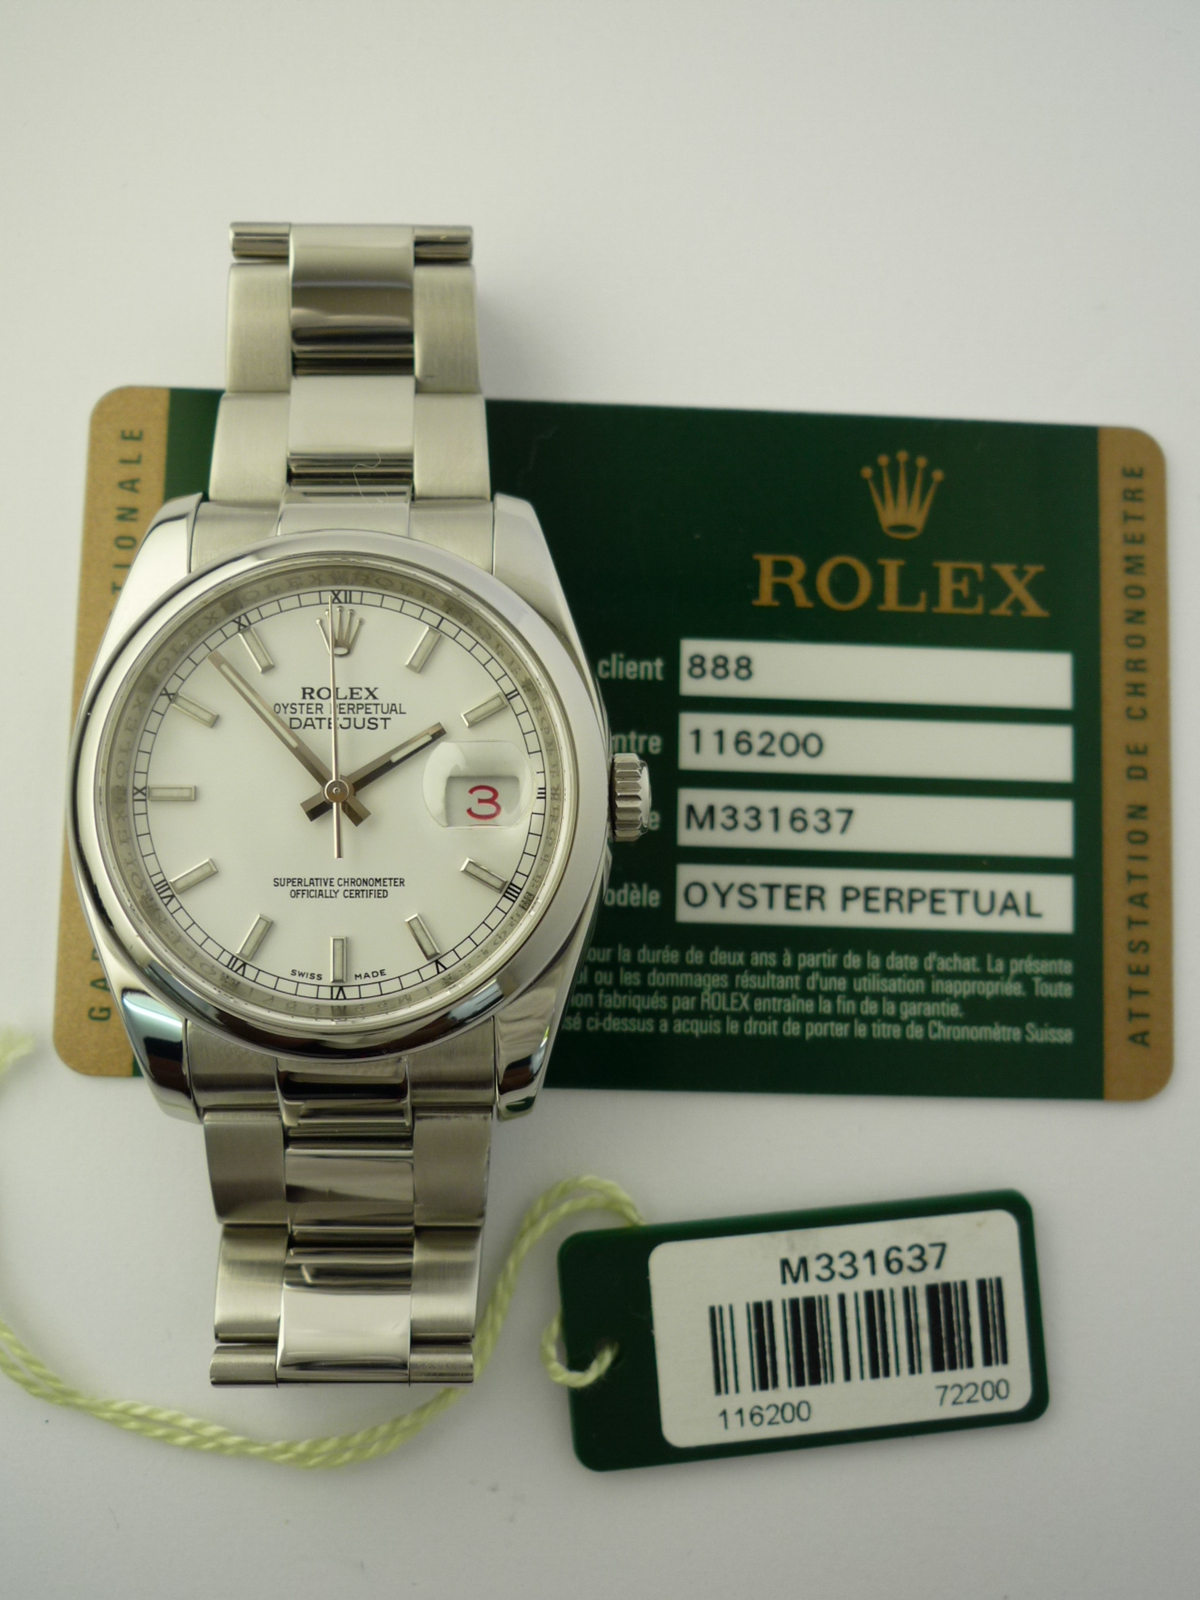 Rolex Oyster Perpetual dateJust watch 